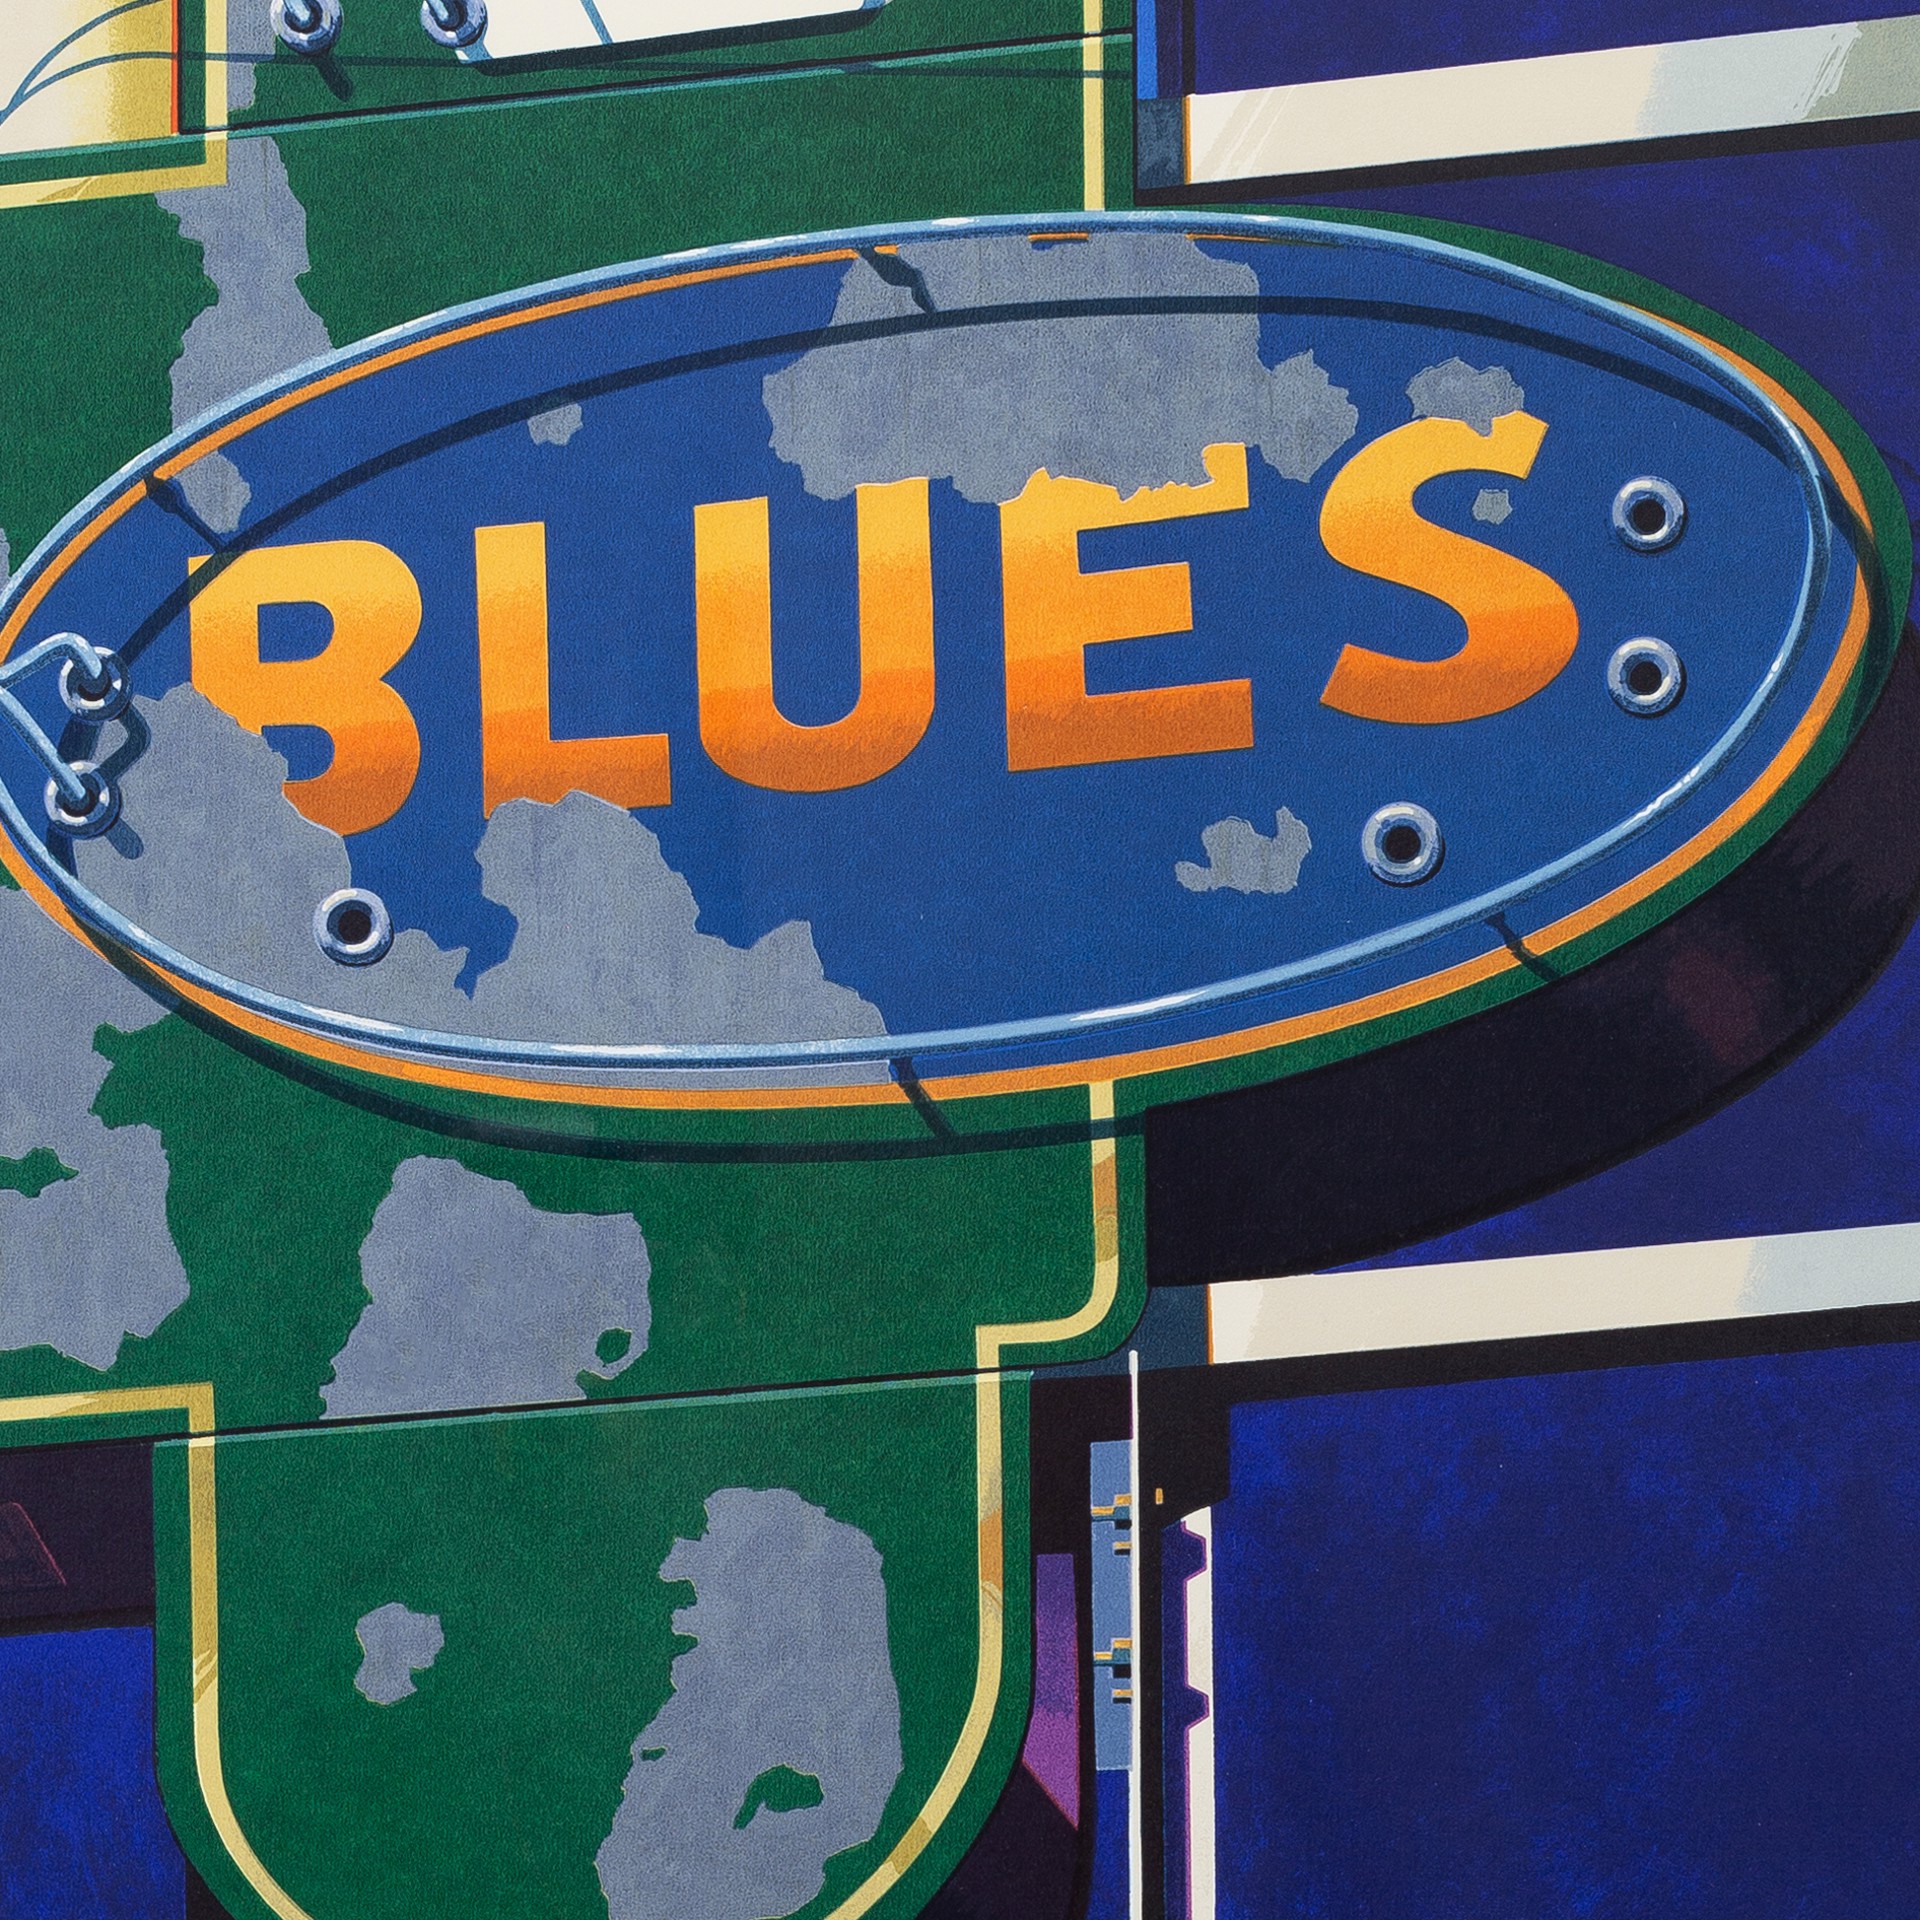 Blues (from American Signs portfolio) by Robert Cottingham